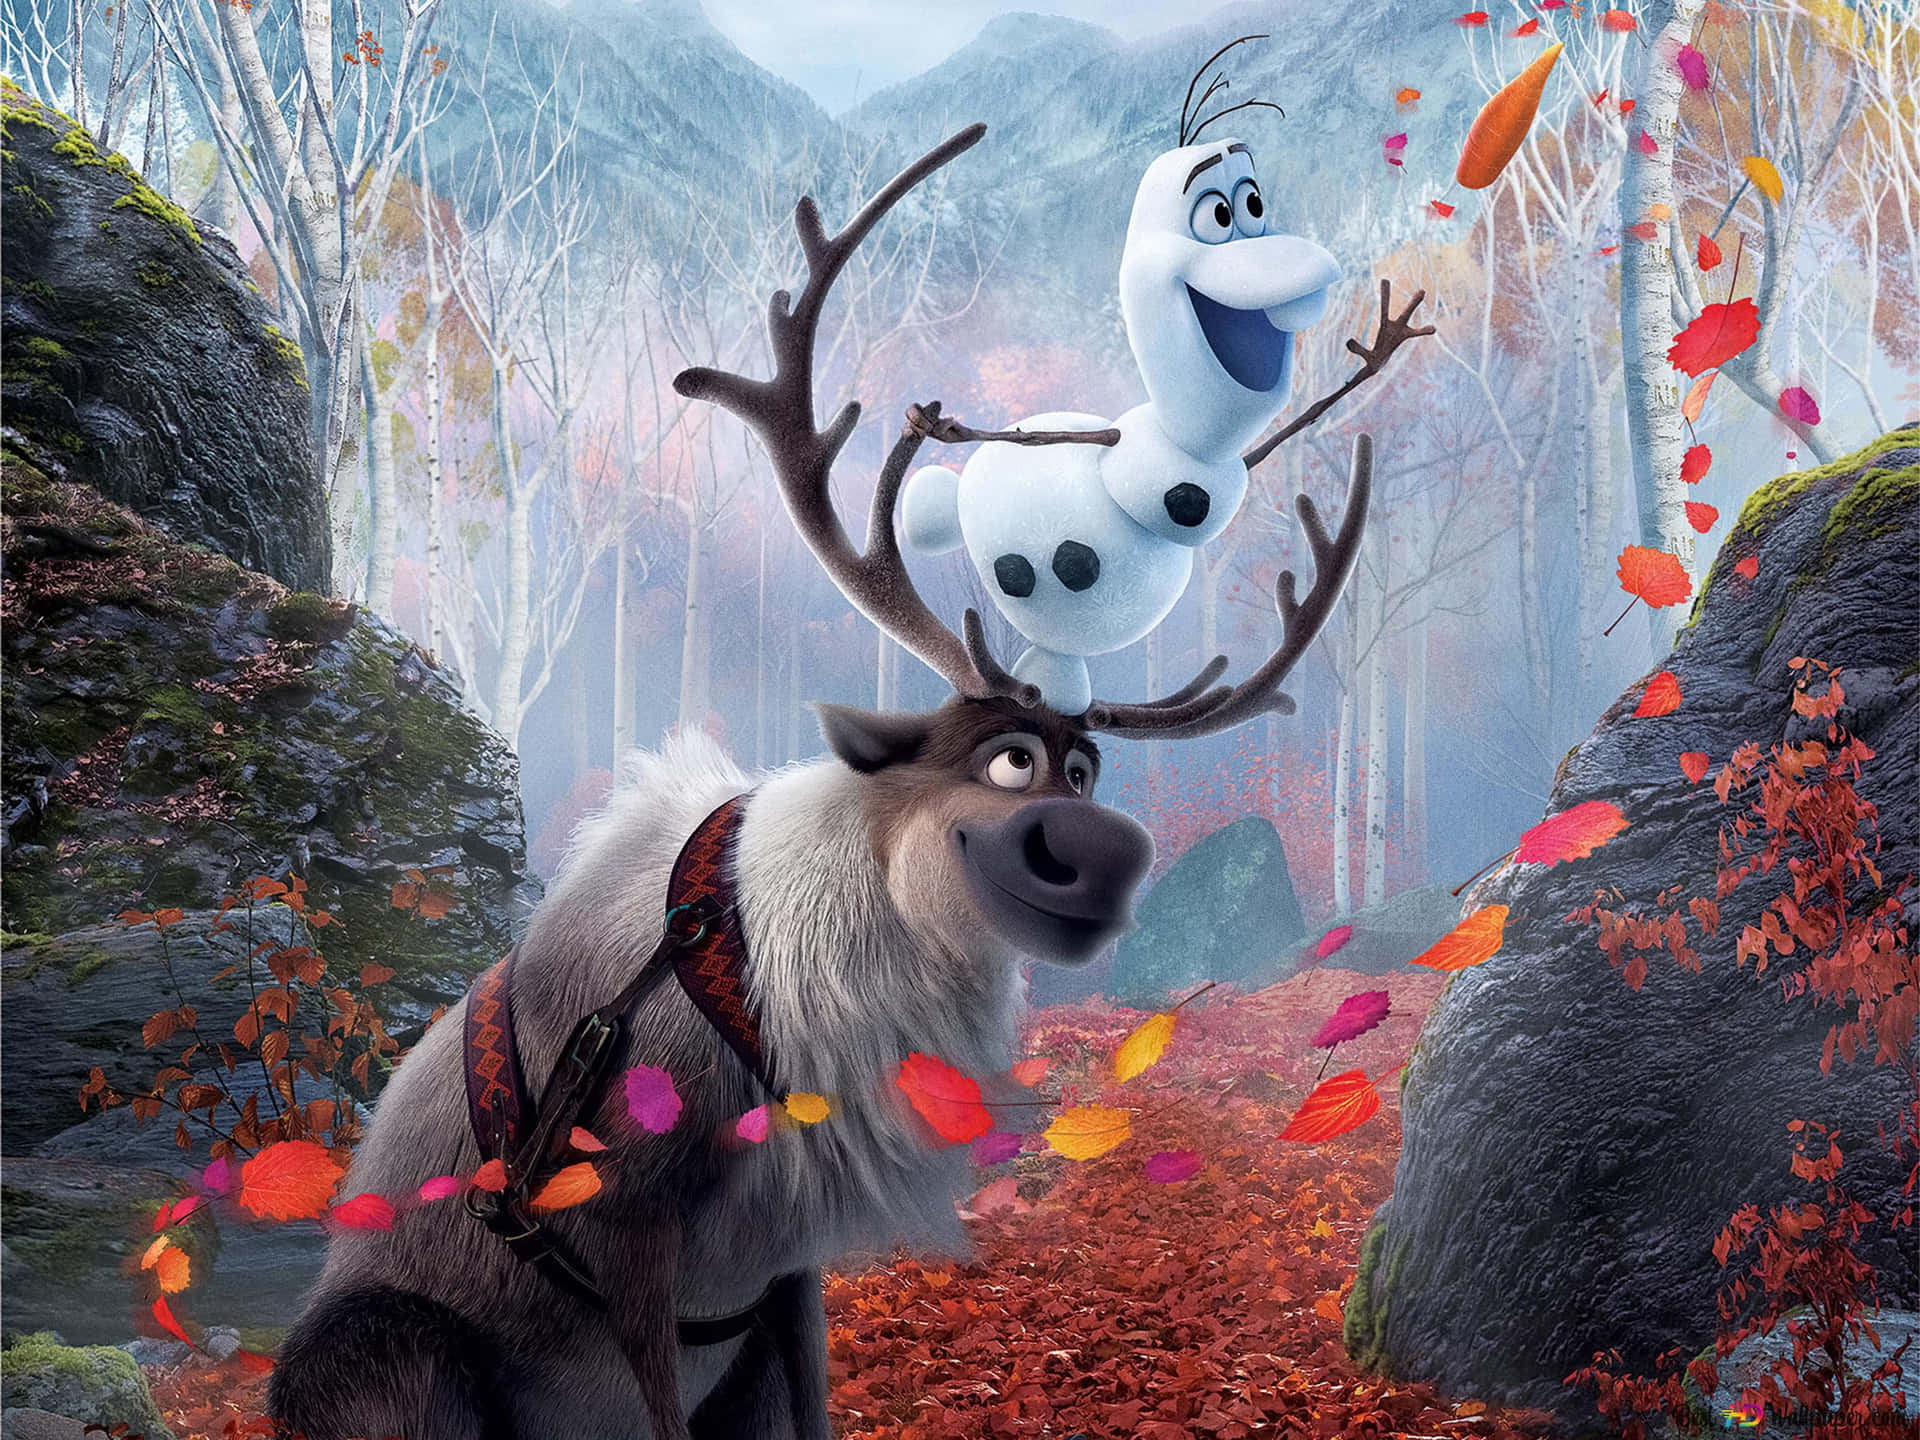 Cute Olaf, side by side with the Summer Spirit Wallpaper